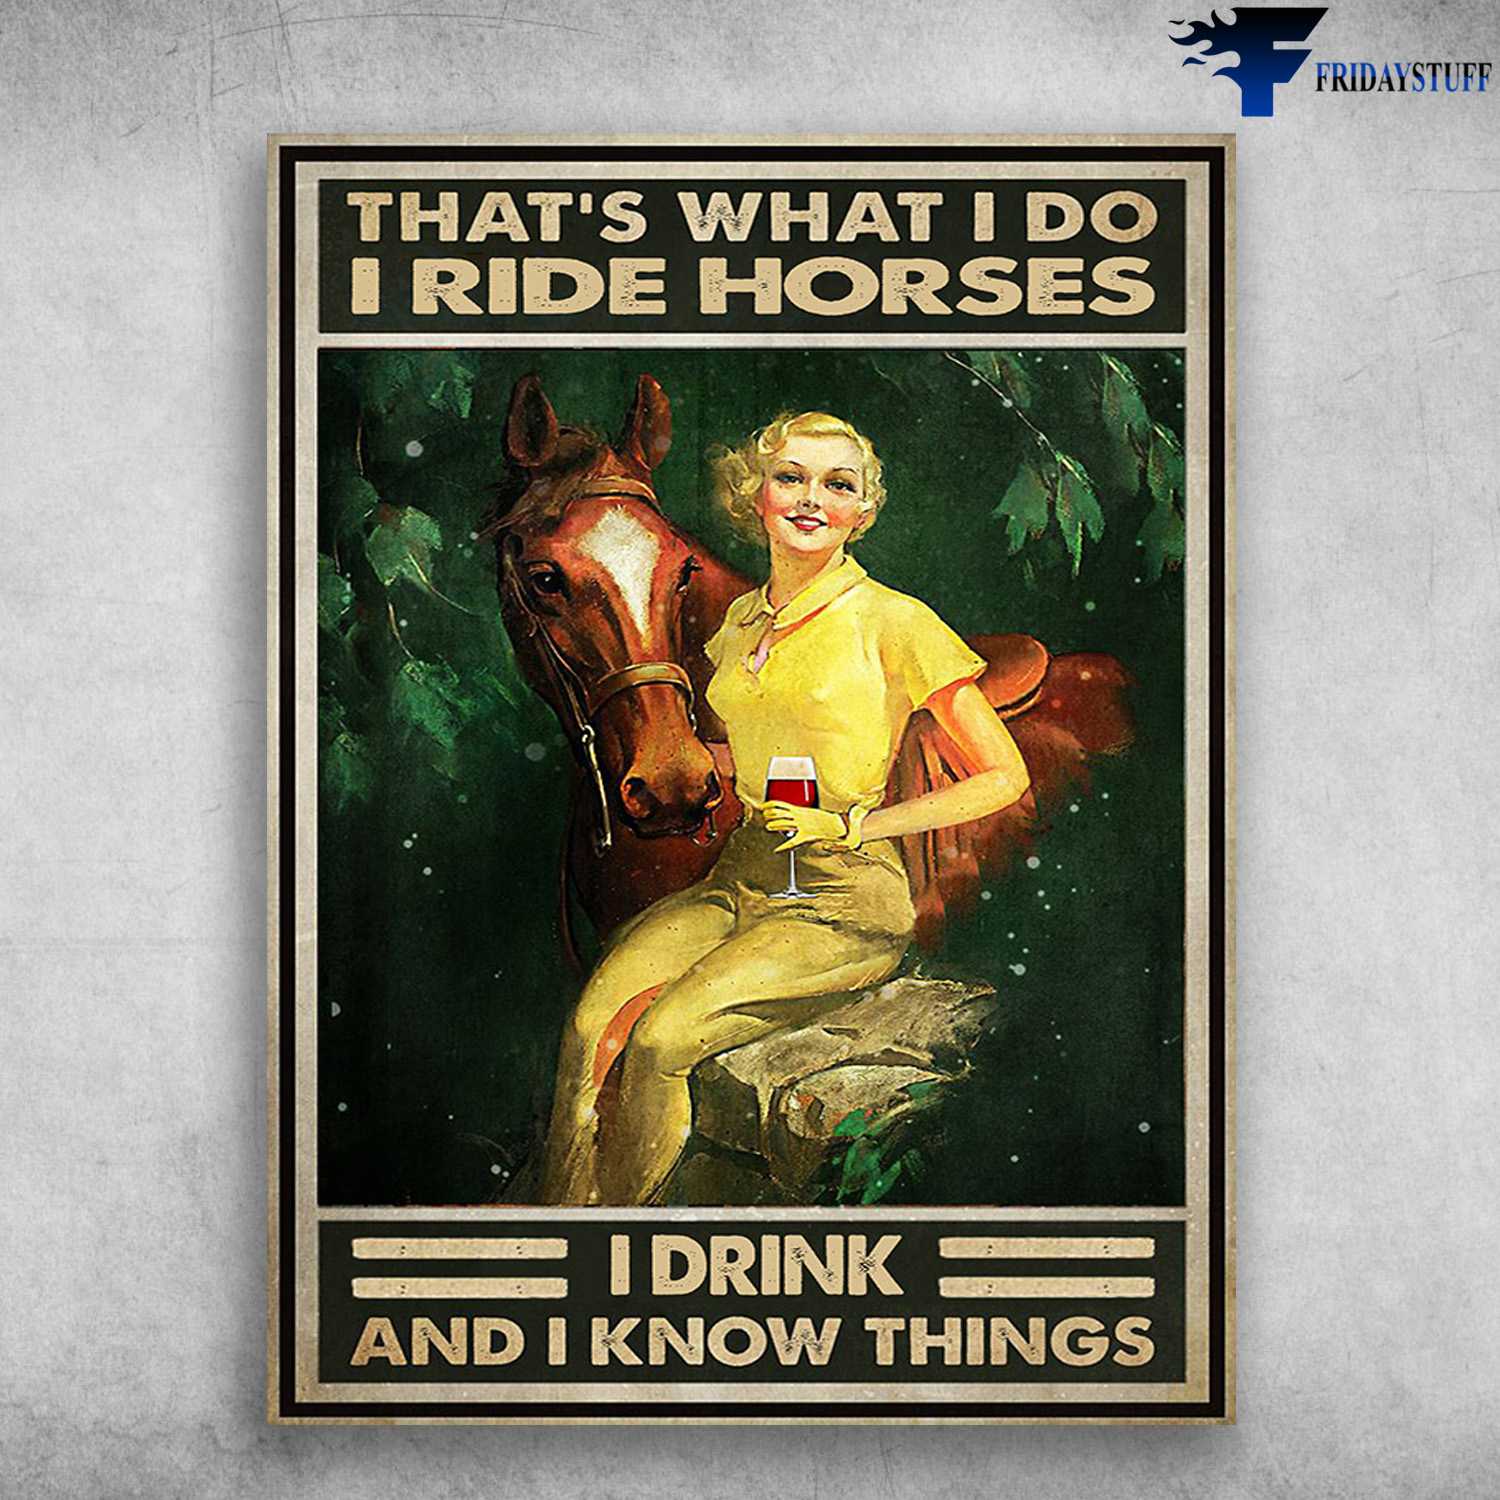 Girl And Horse, Horse And Wine Lover - That's What I Do, I Ride Horse, And I Know Things